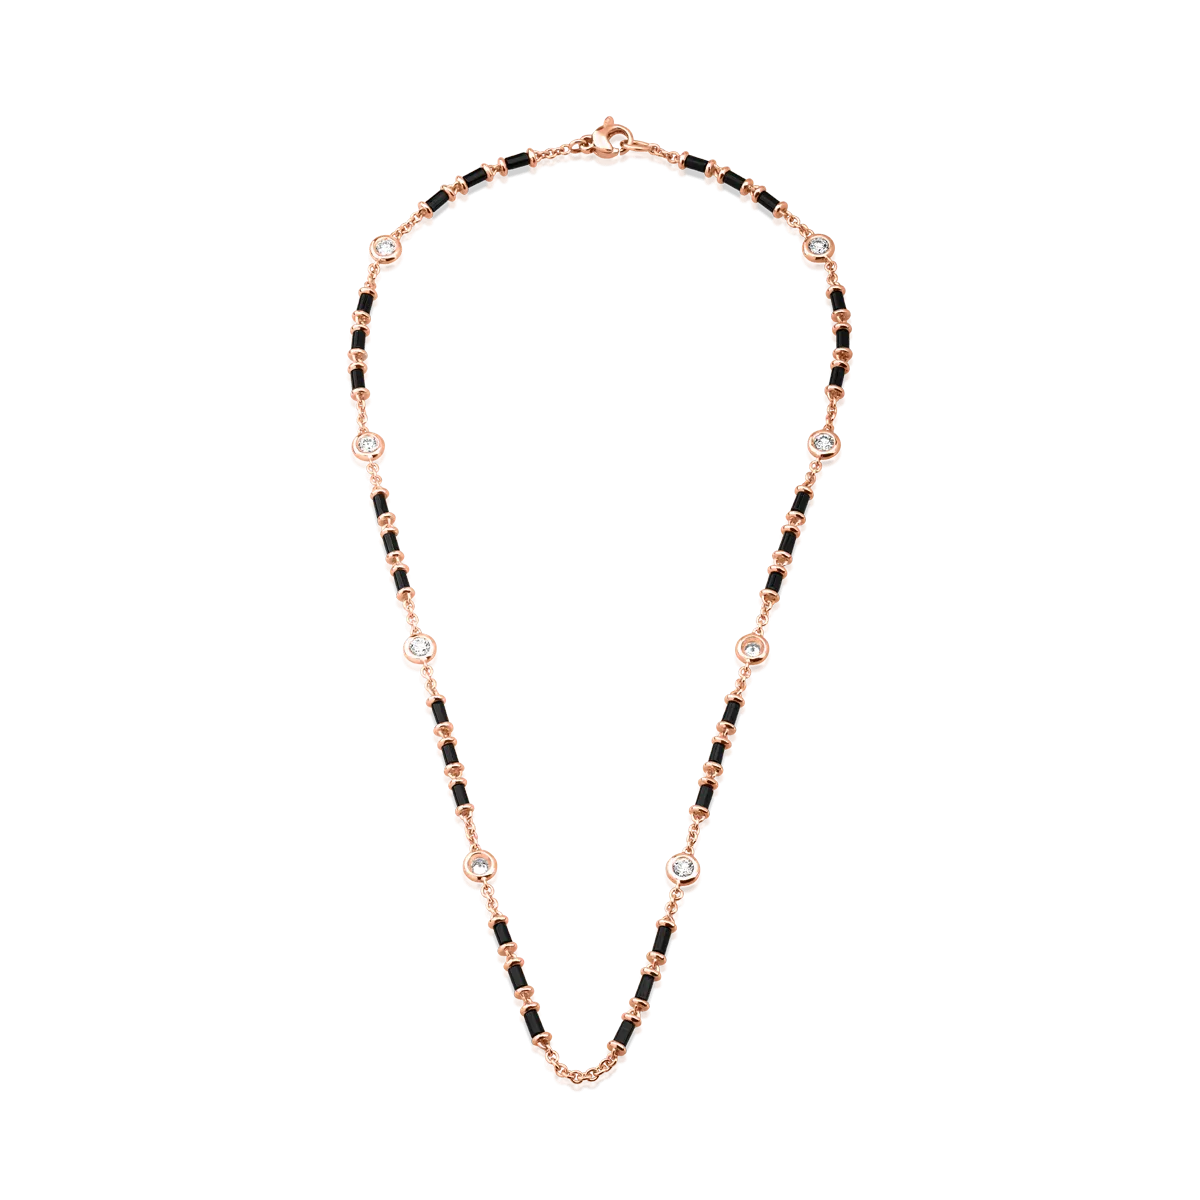 18K rose gold men's necklace with onyx of 6.5ct and diamonds of 1.42ct